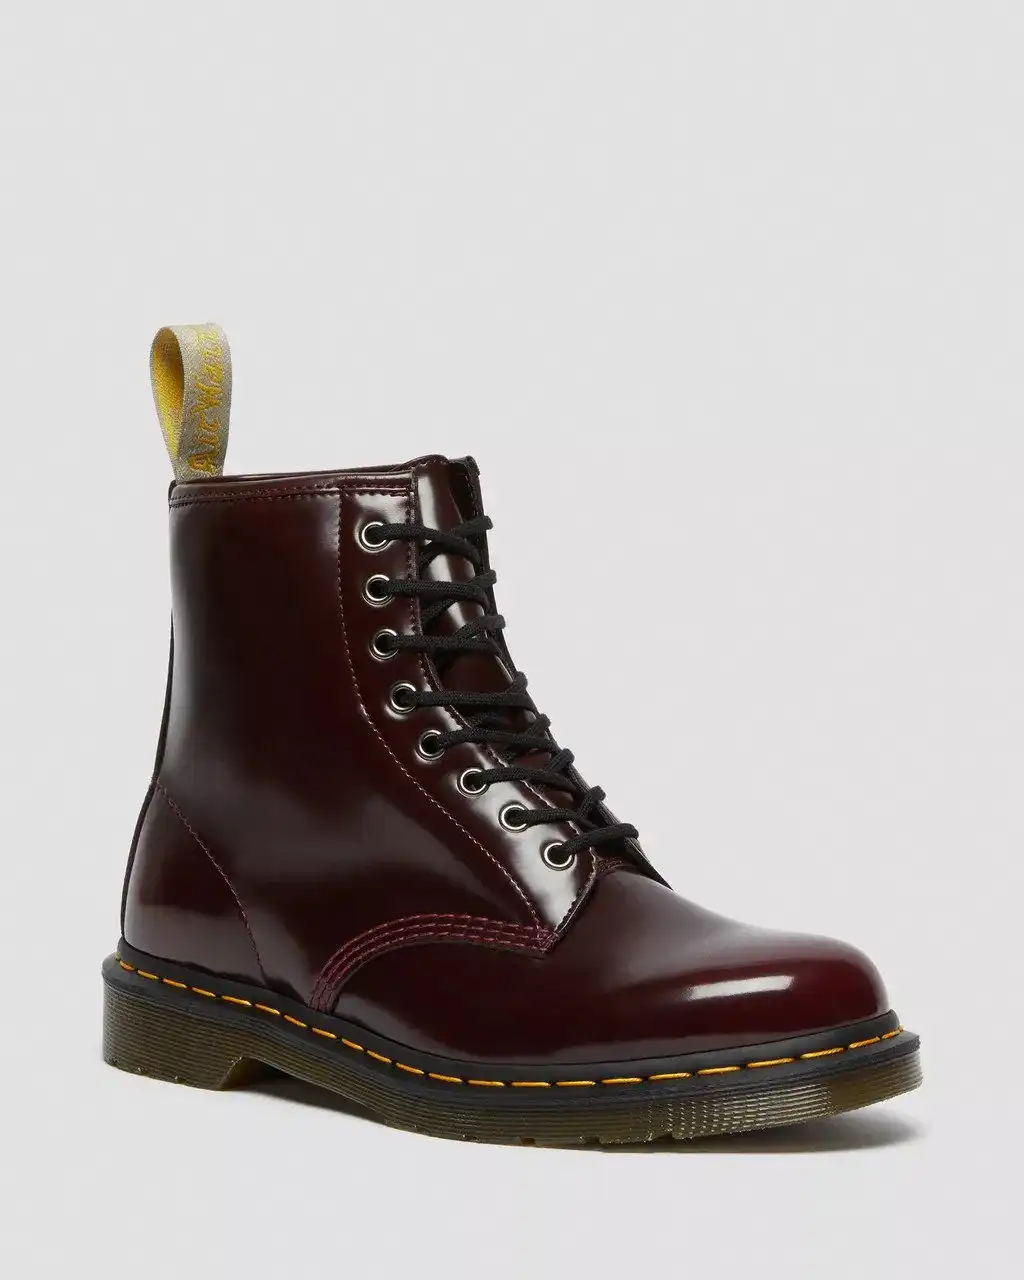 Dr Martens 1460 cherry red ankle boots